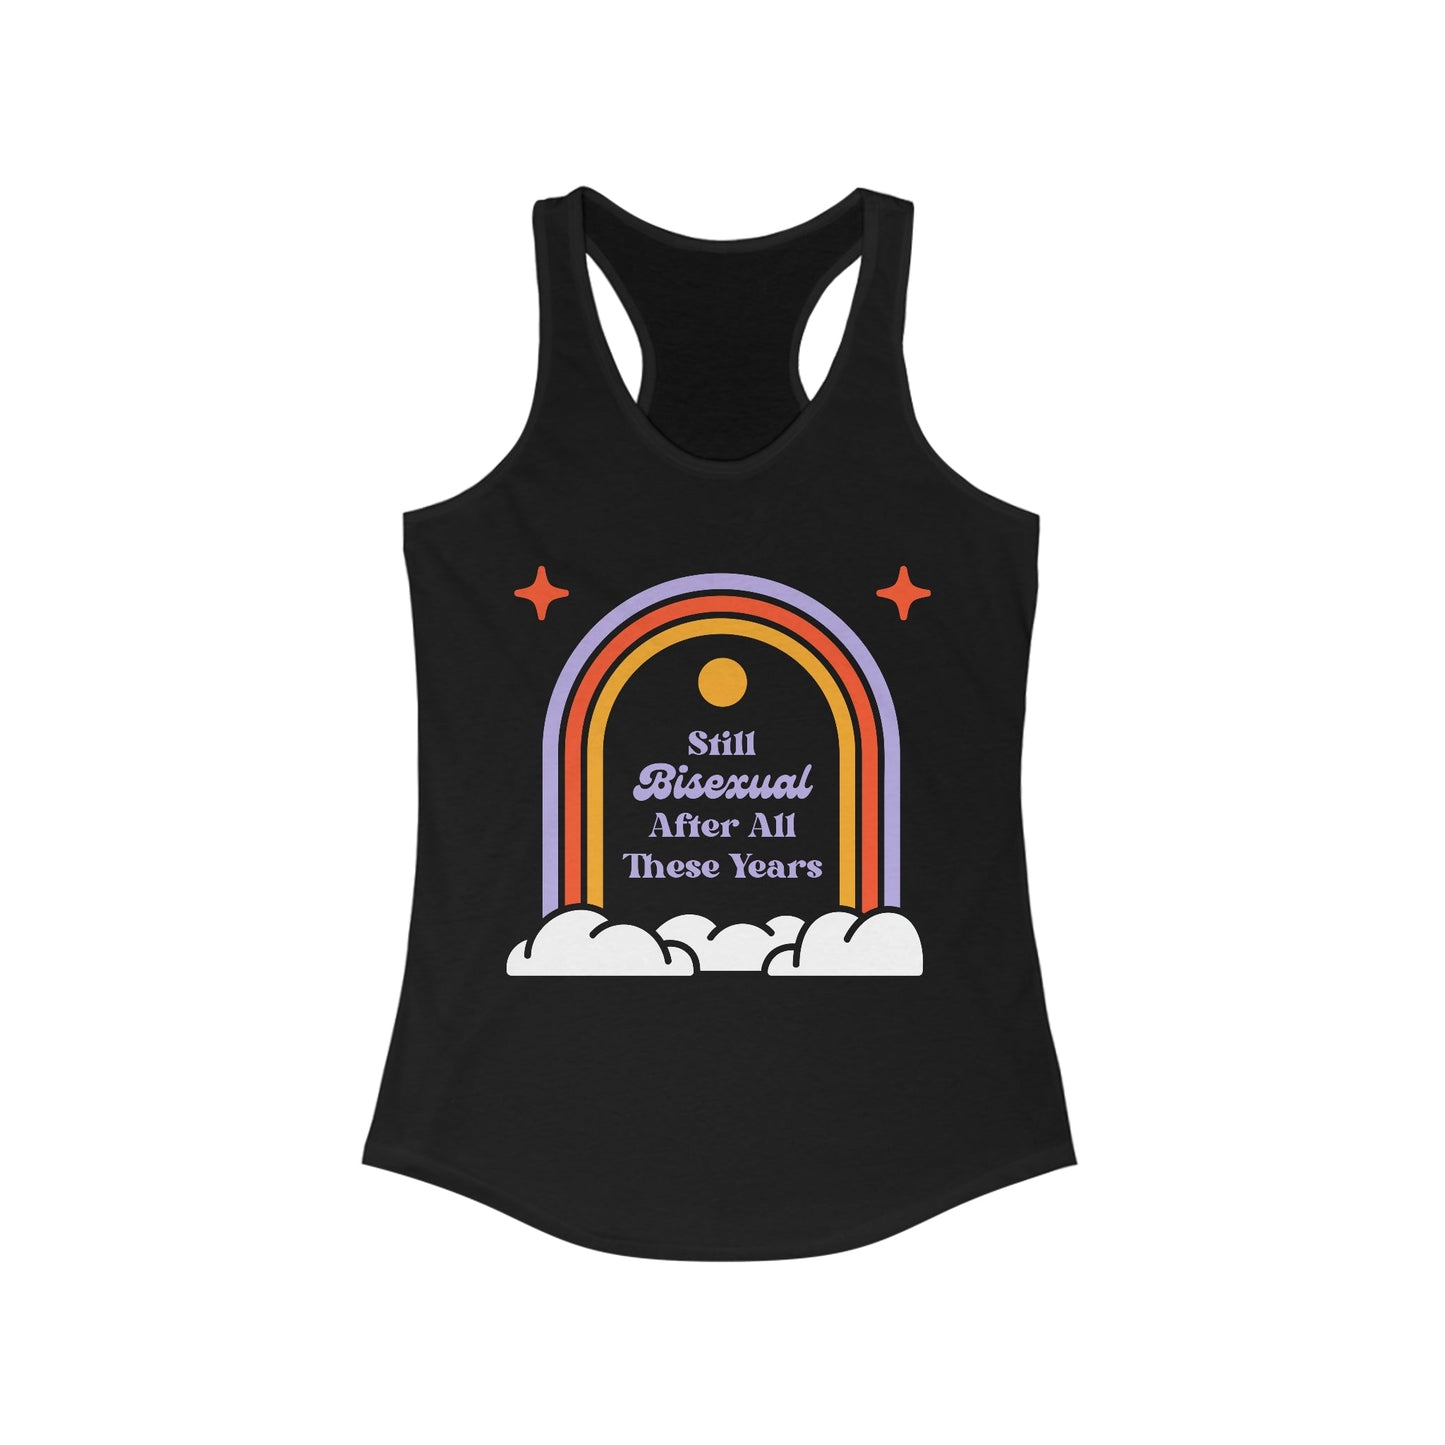 Still Bisexual After All These Years Women's Ideal Racerback Tank